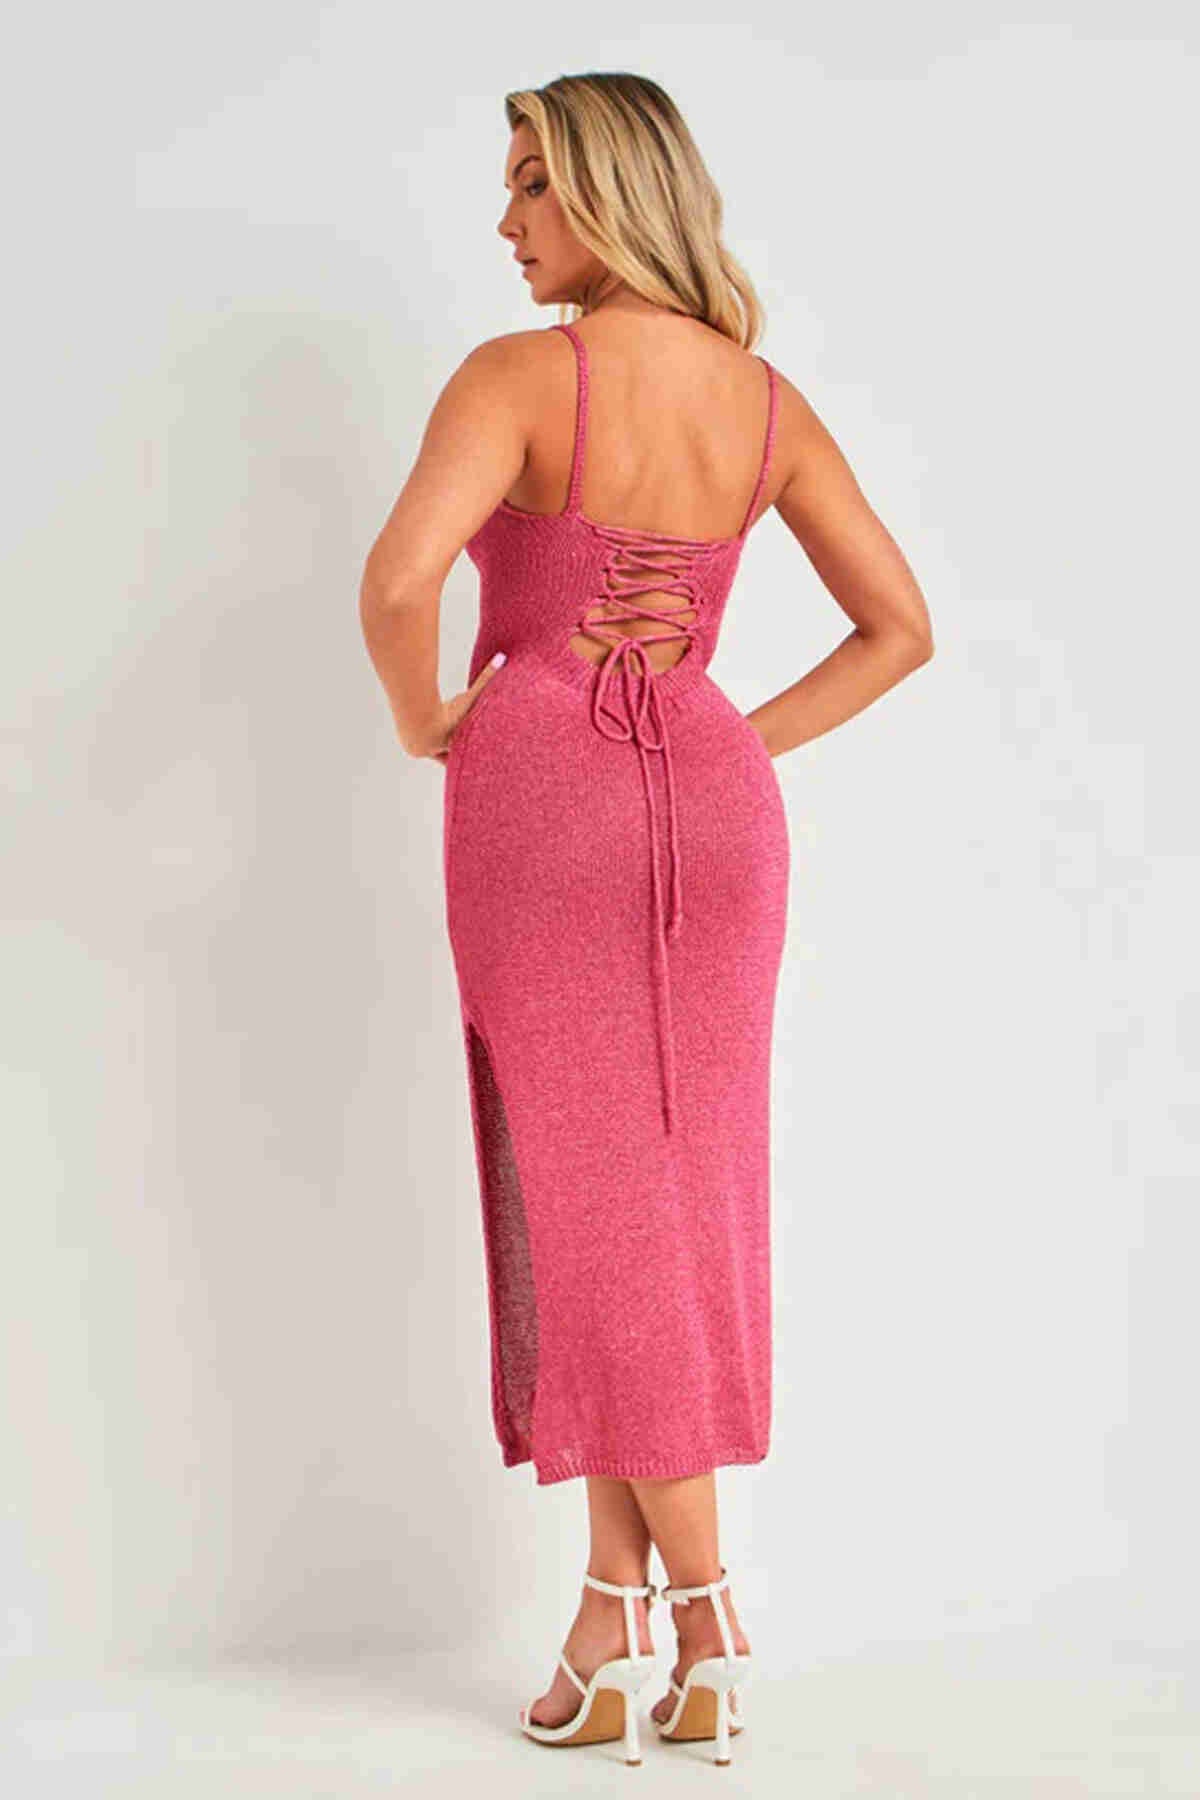 Knitted Knitted Dress With Back Neckline Tie Up Knit Knit Dress Pink